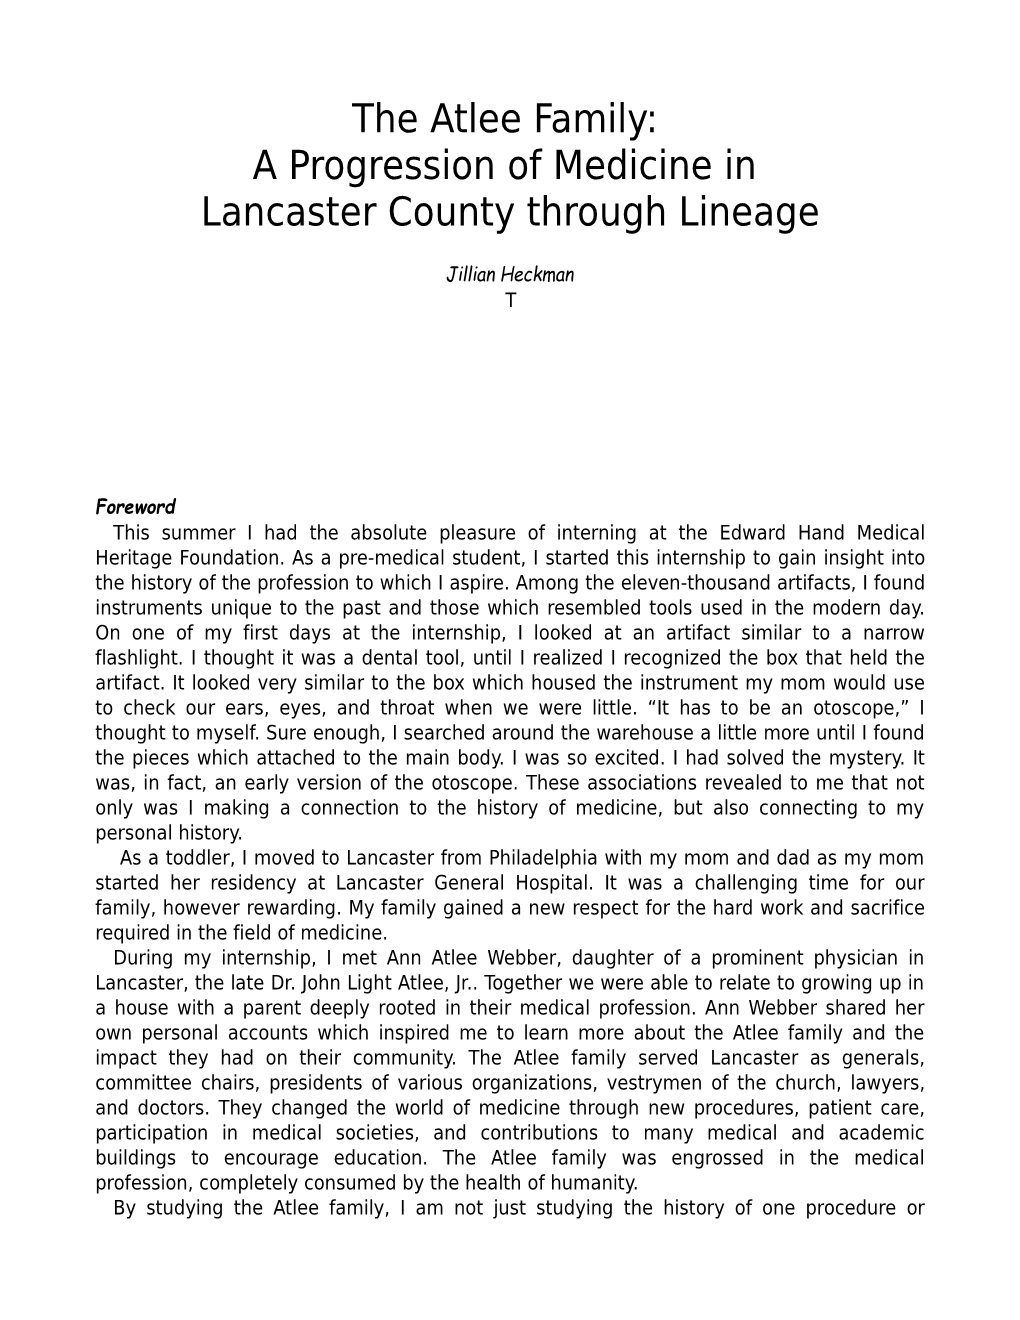 The Atlee Family: a Progression of Medicine in Lancaster County Through Lineage